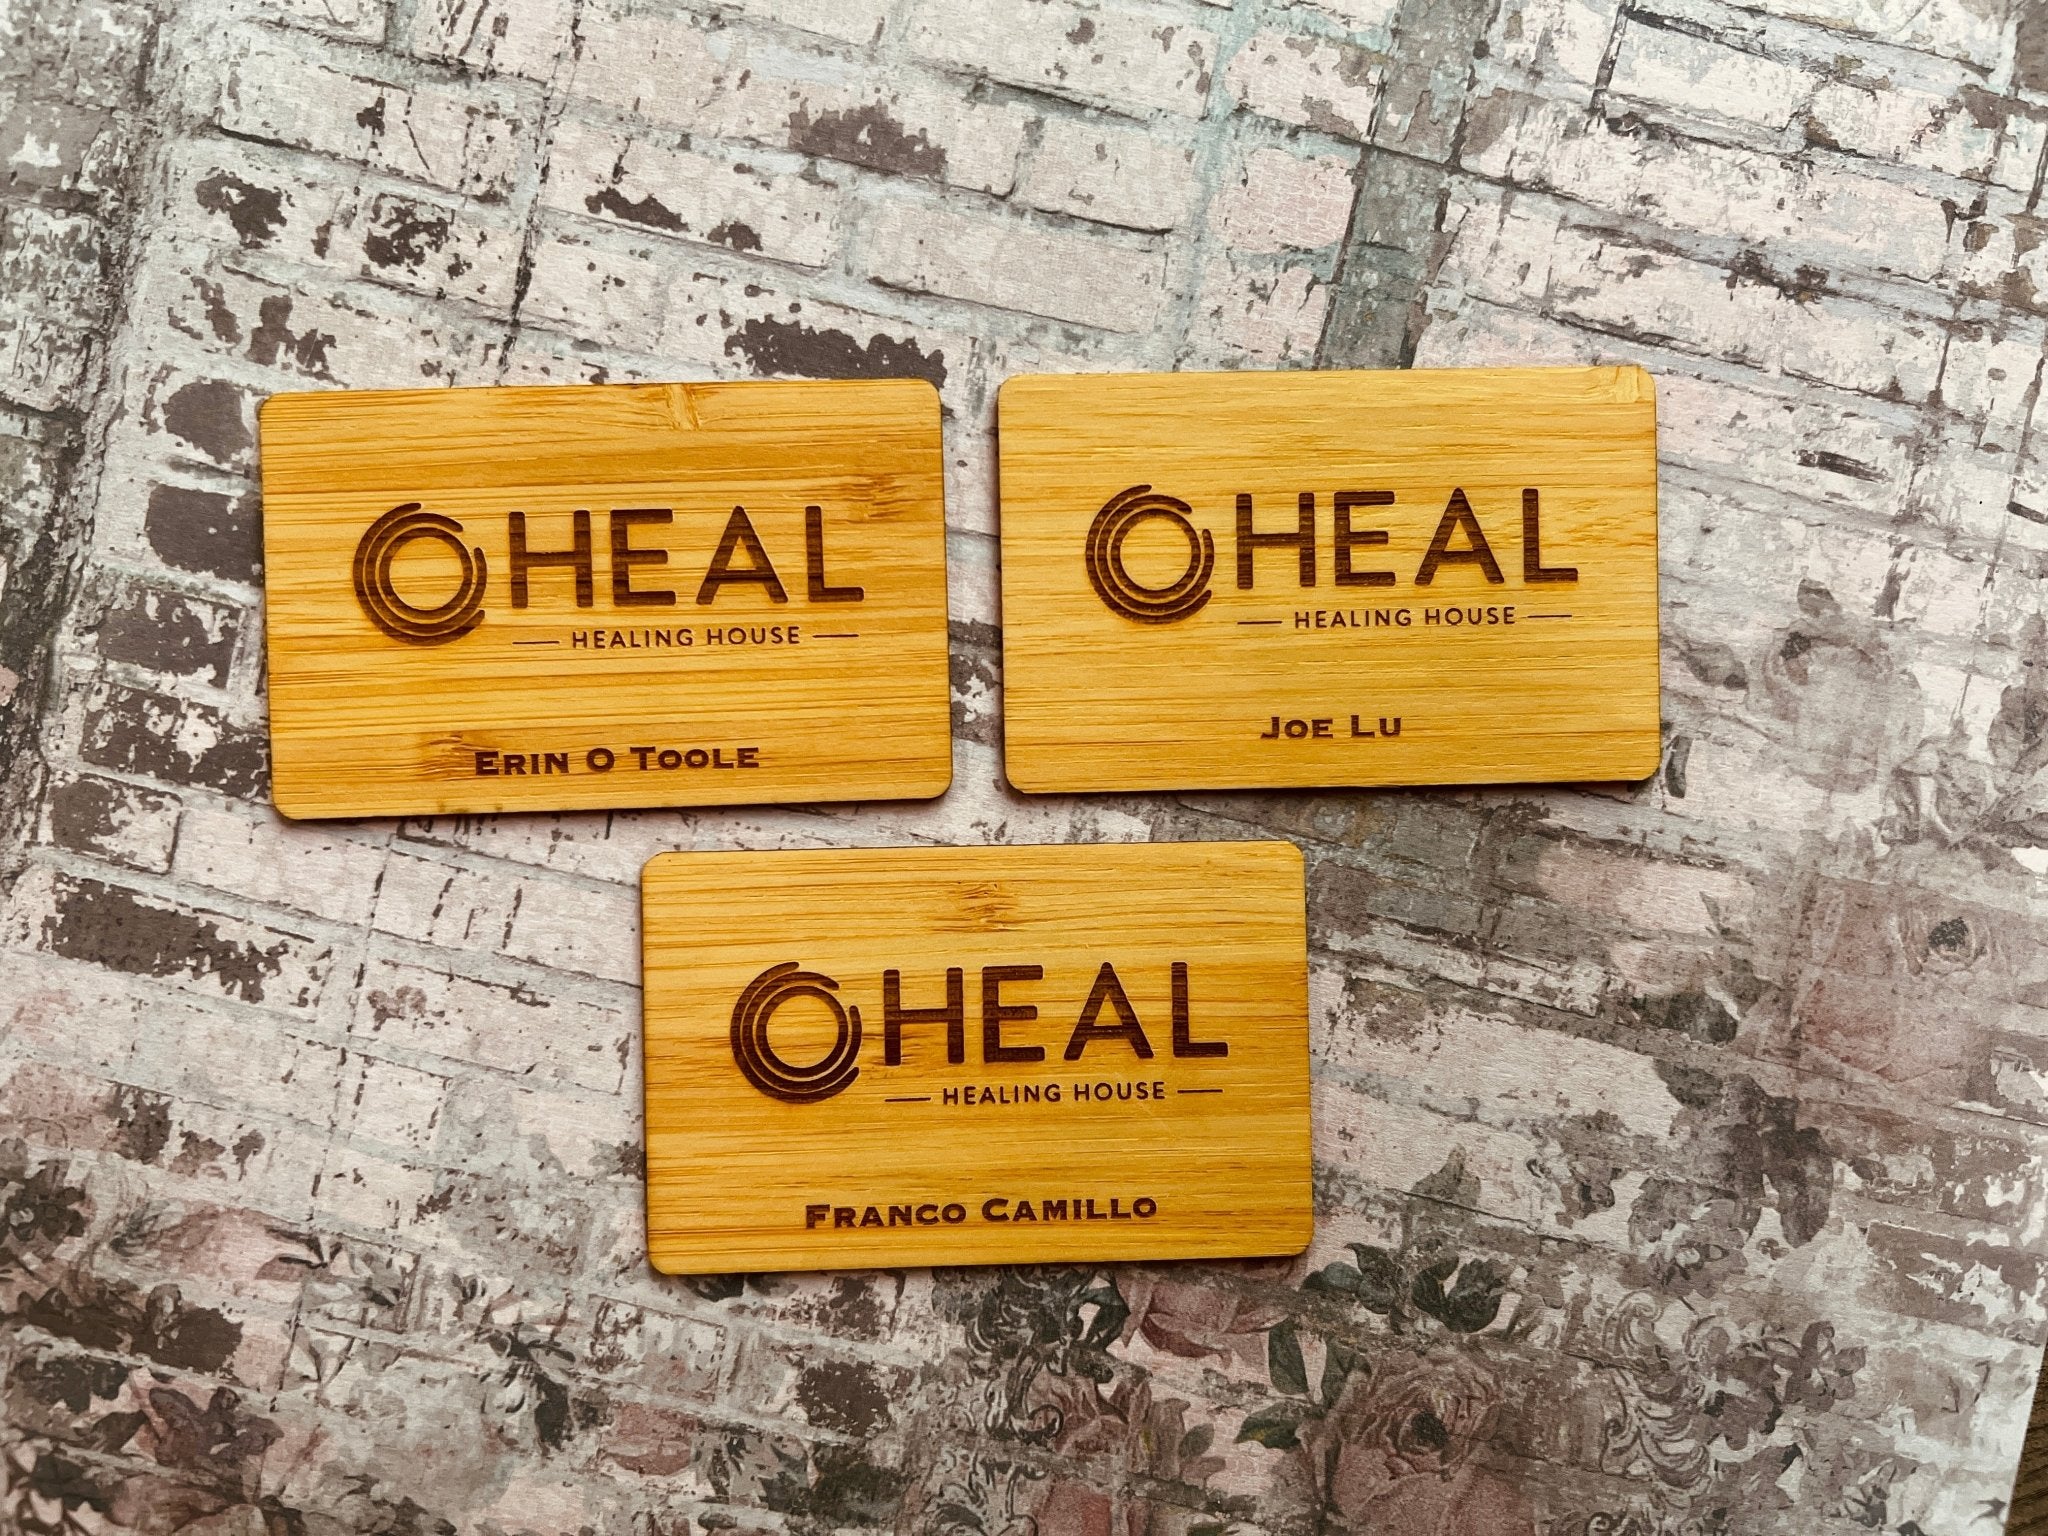 Sustainable Bamboo - NFC Business card - Tap Tag